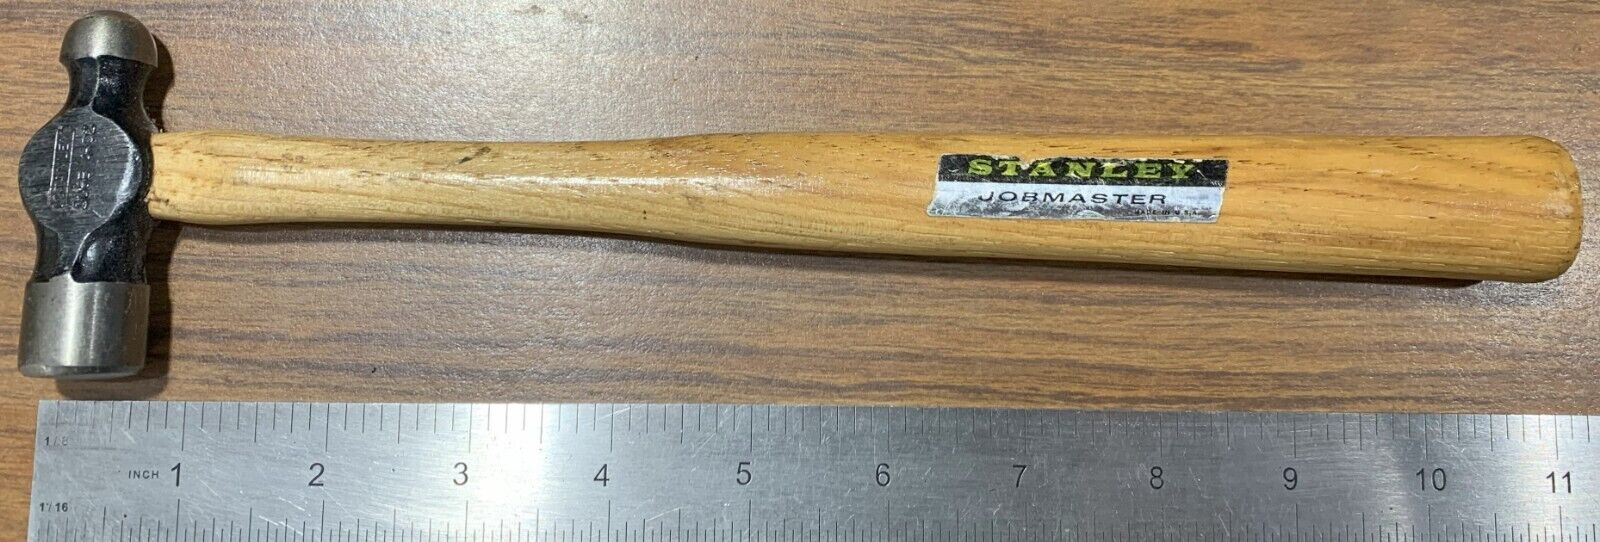 Vintage Stanley 4oz Ball Peen Hammer 306B Made in USA